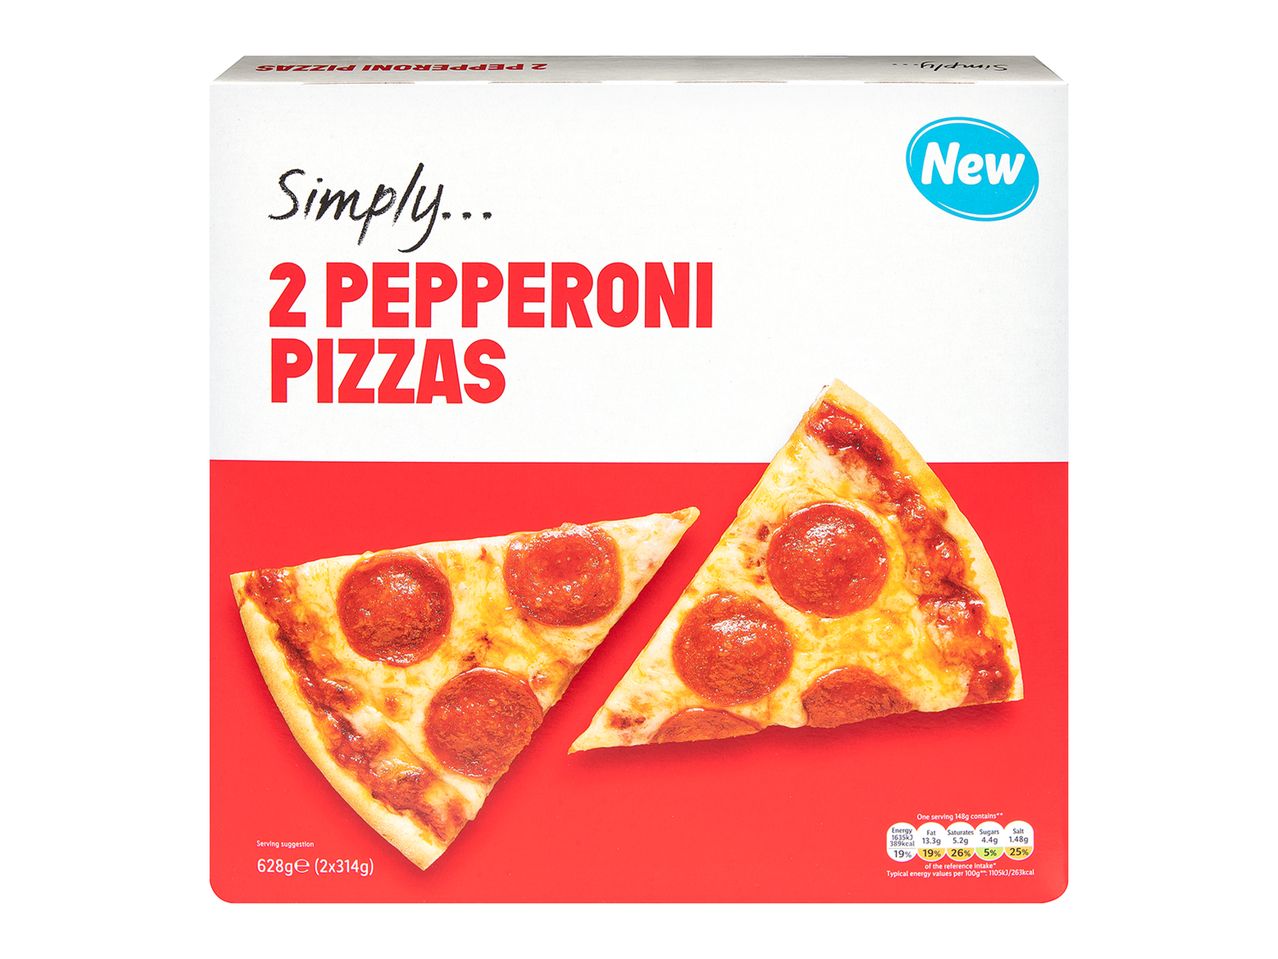 Go to full screen view: Simply Pepperoni Pizza - Image 1